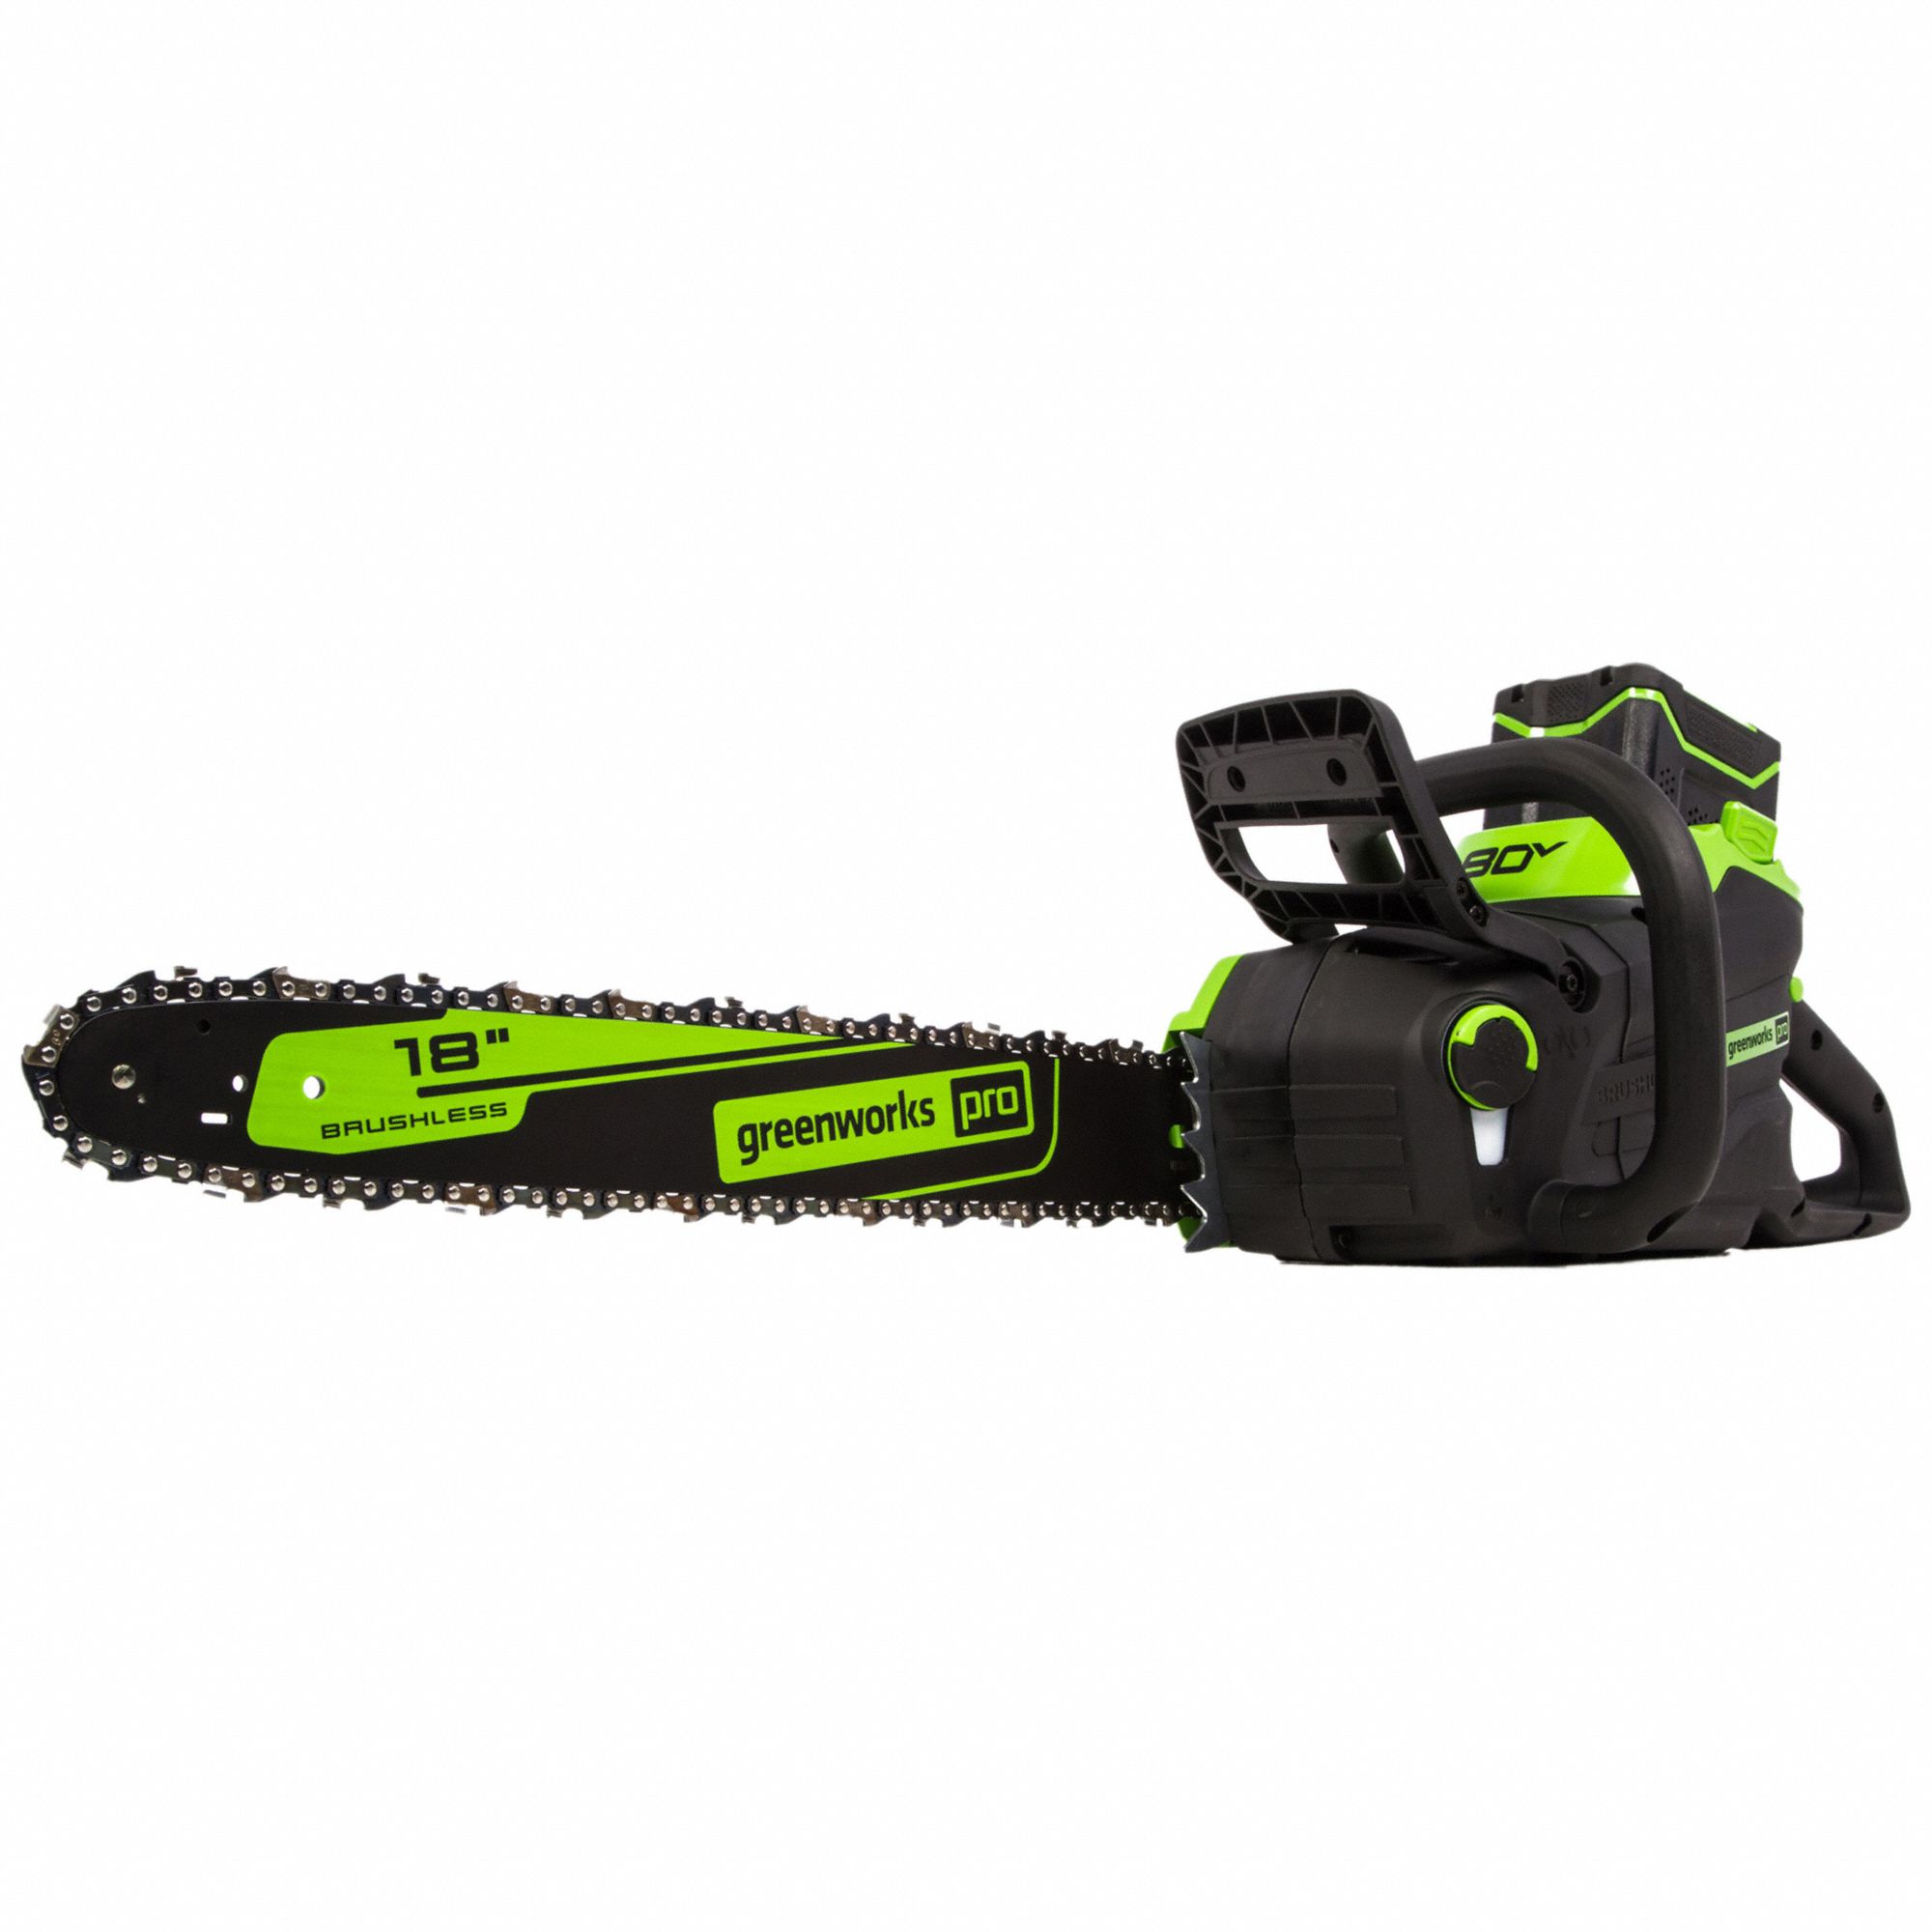 Cordless Chain Saw: Electric, 18 in Bar Lg, 45 cc Engine Displacement, 3.4 hp HP